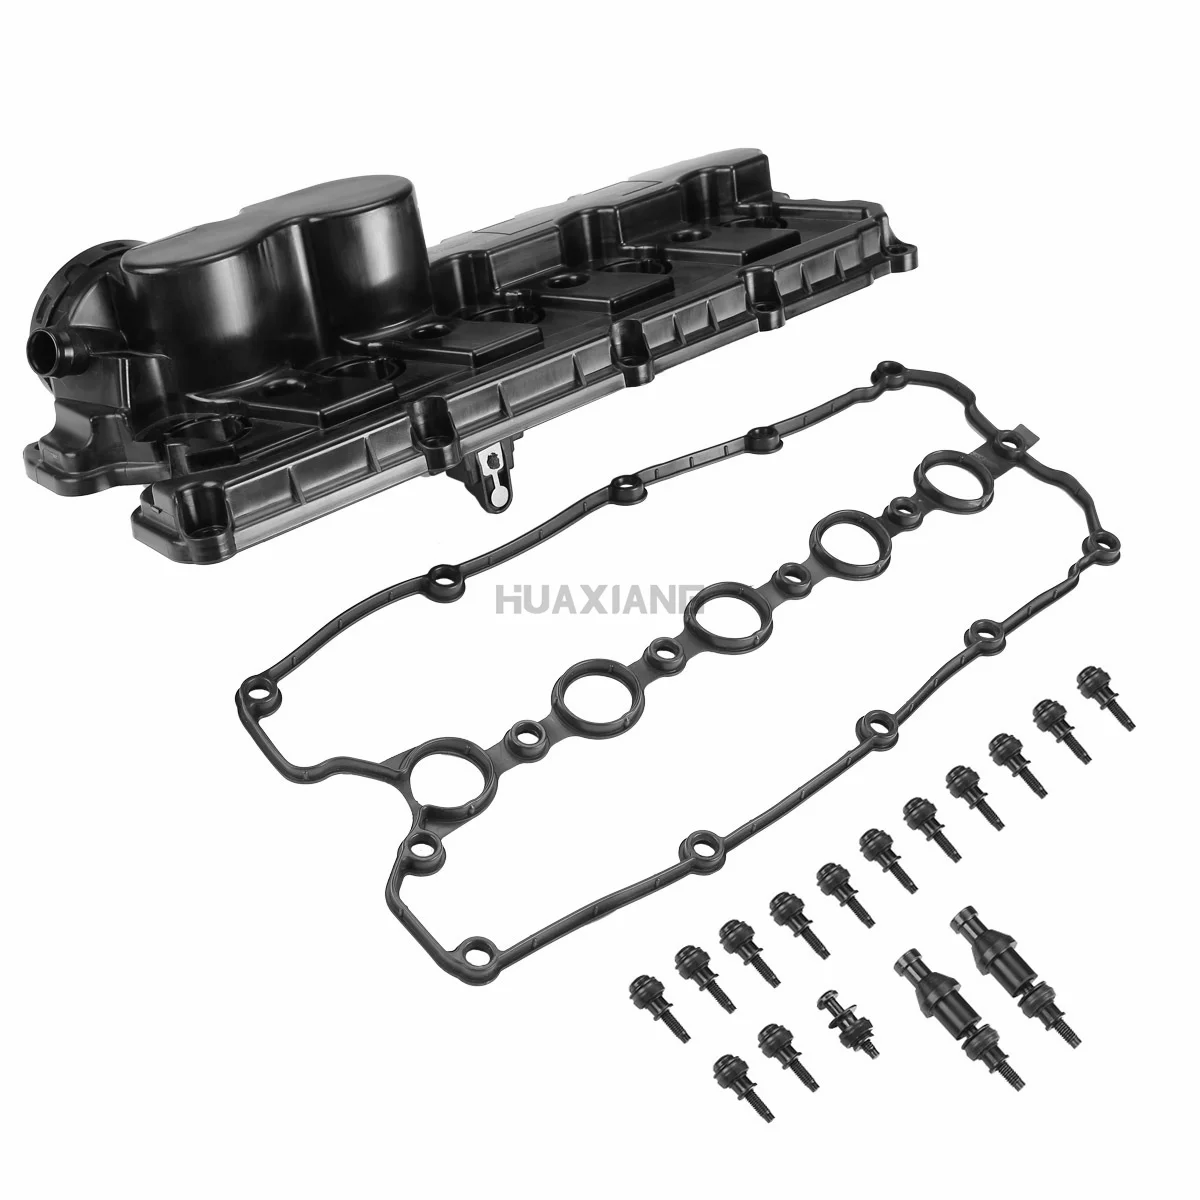 

CN US CA GMR Engine Valve Cover with Gasket Bolts Cap for VW Passat Jetta Beetle Golf Rabbit 07K103469F